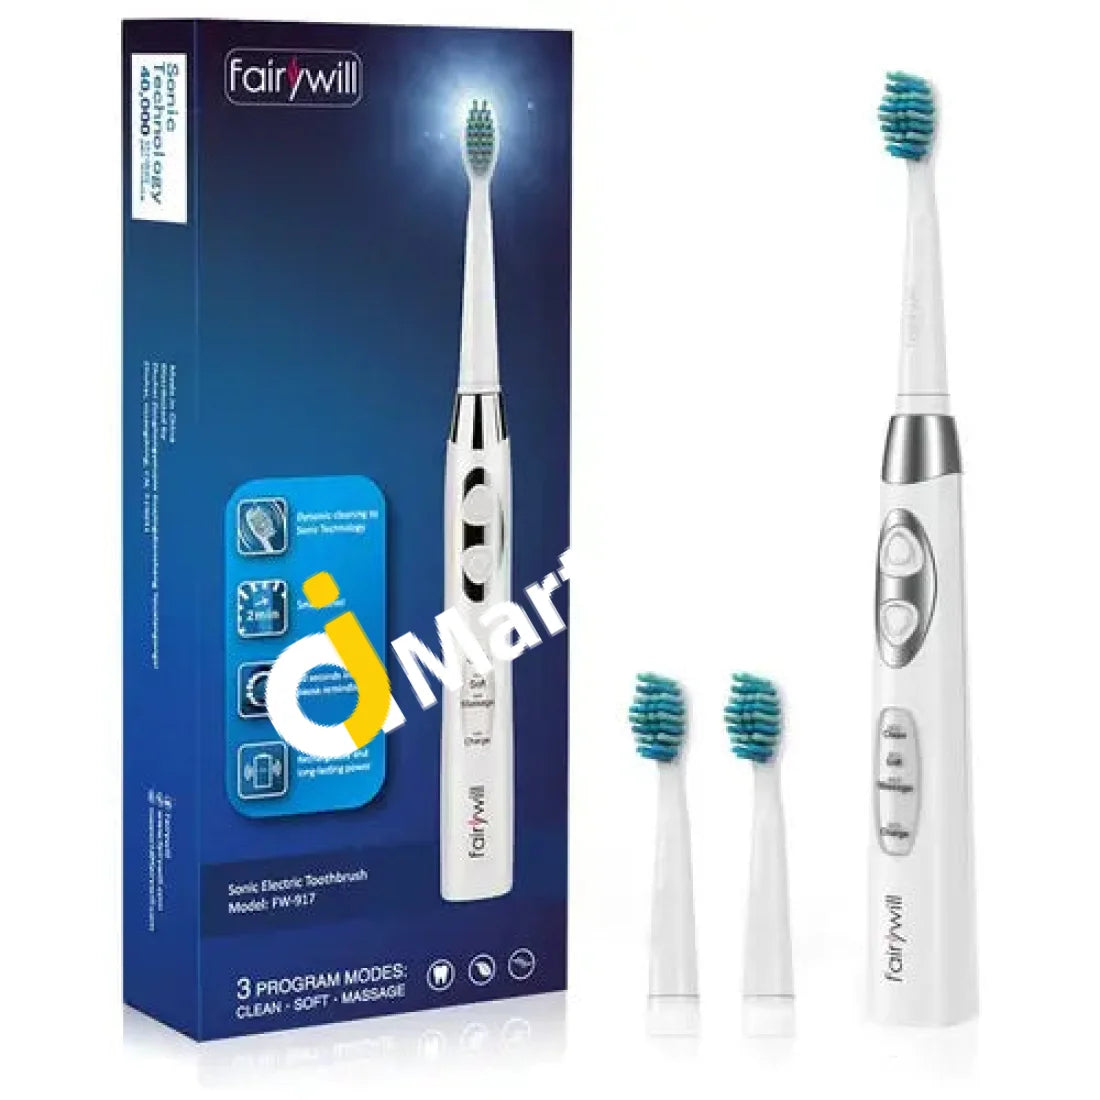 Fairywill 917 Sonic Electric Rechargeable Toothbrush With 3 Replacement Heads (White)- Imported From